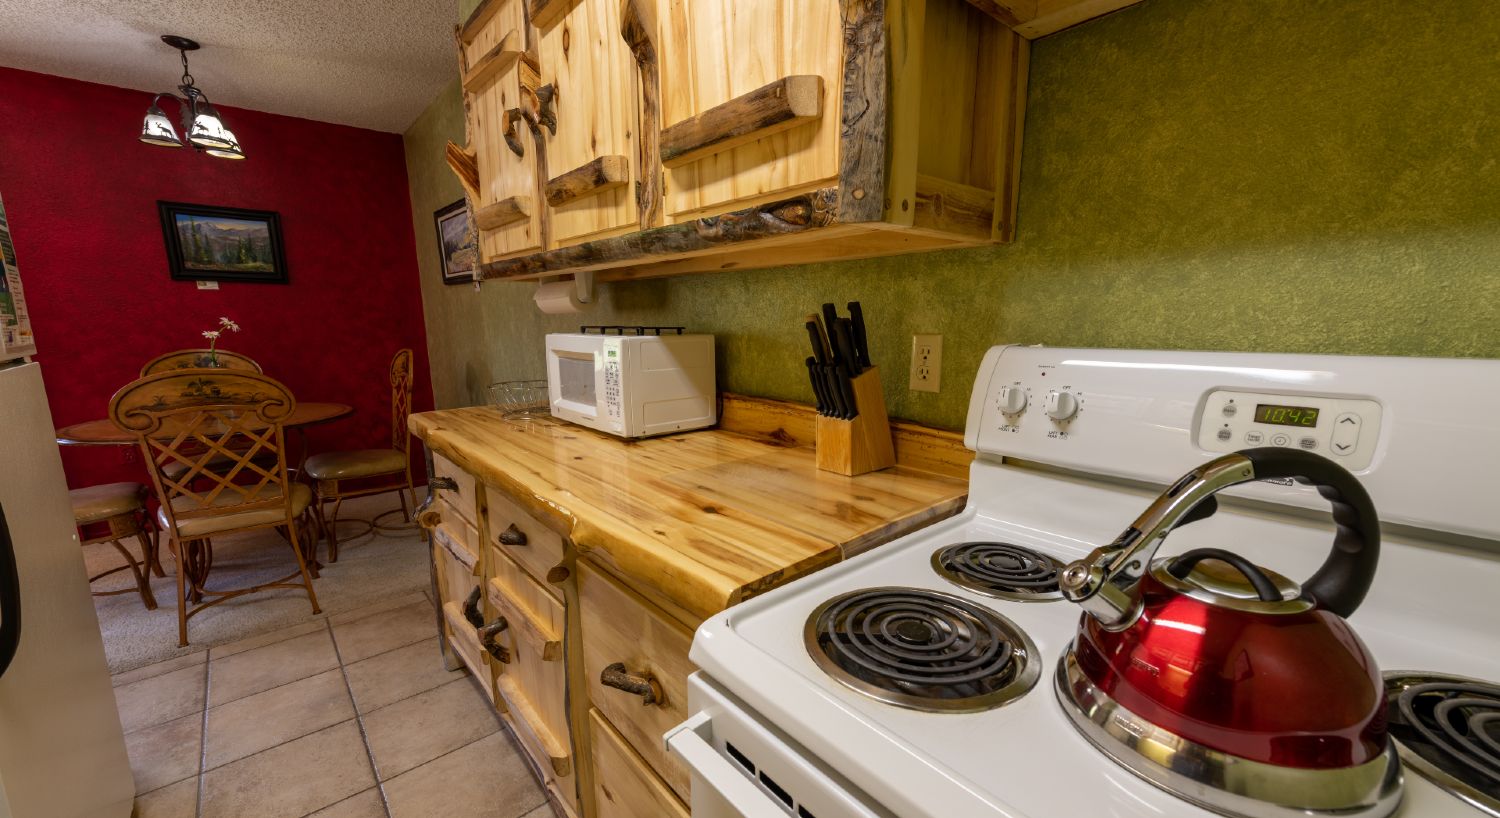 Kitchen with rustic log cabinets, tile floors, and a four burner stove and oven.